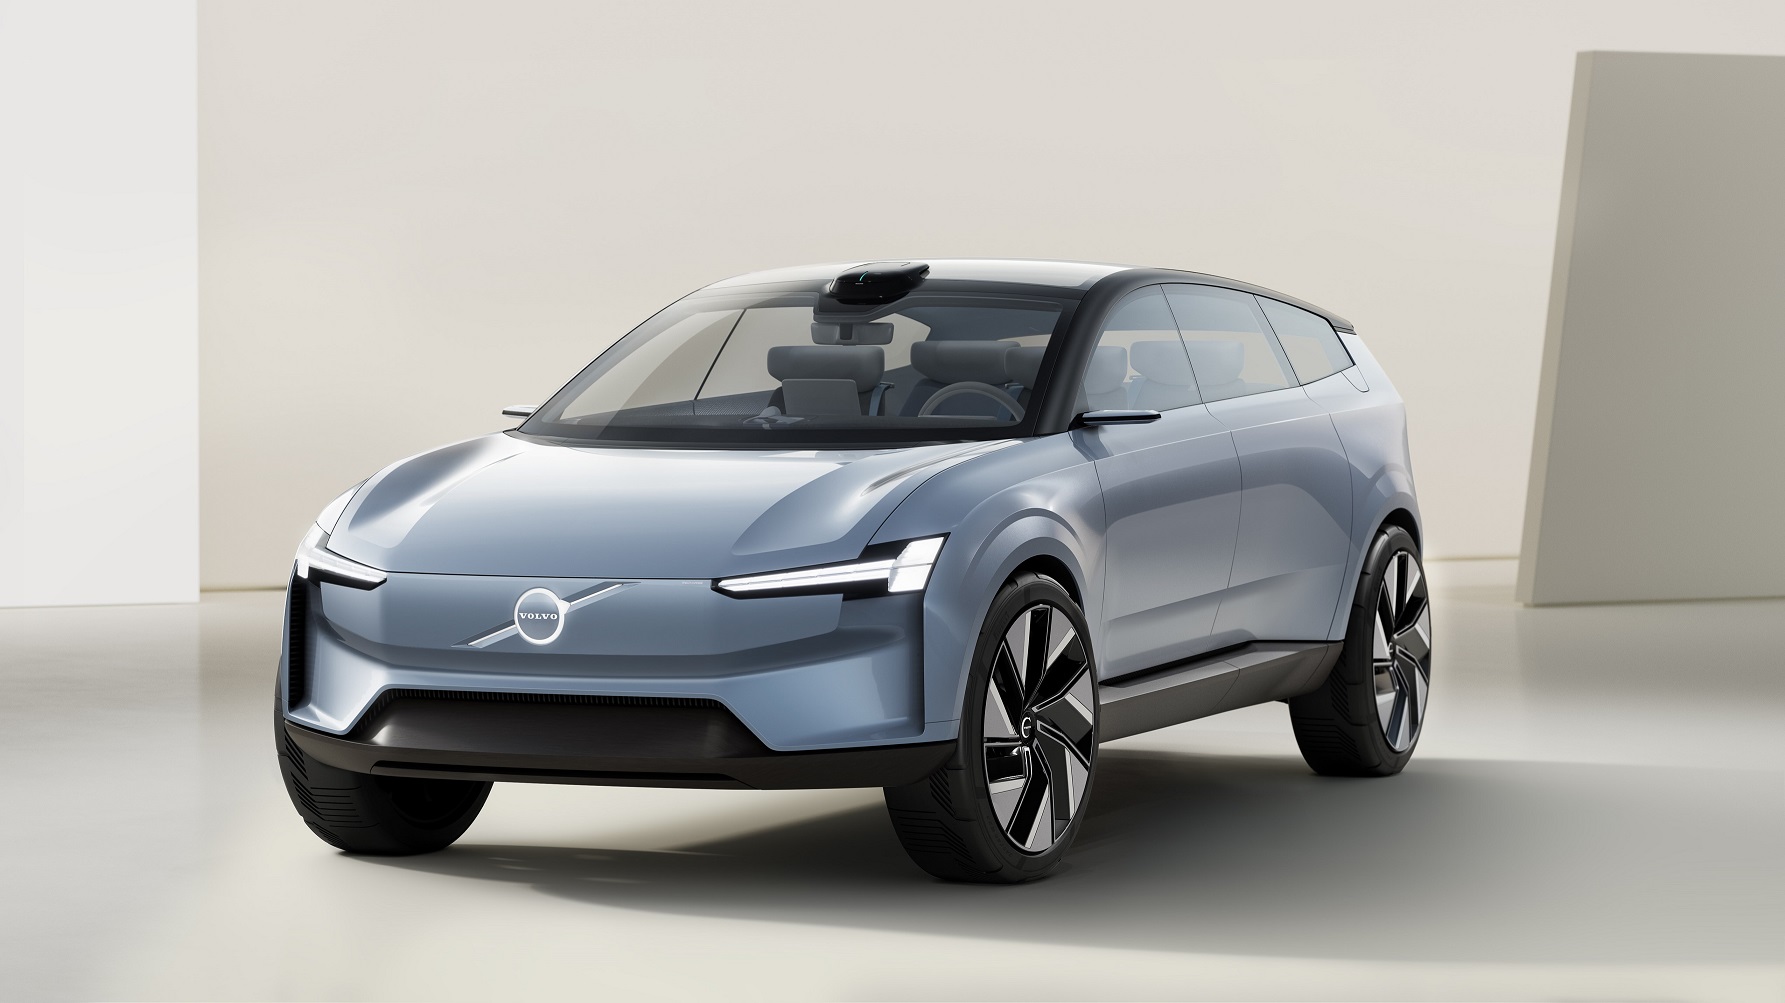 Volvo Cars to focus on range and fast charging for next generation of fully electric cars